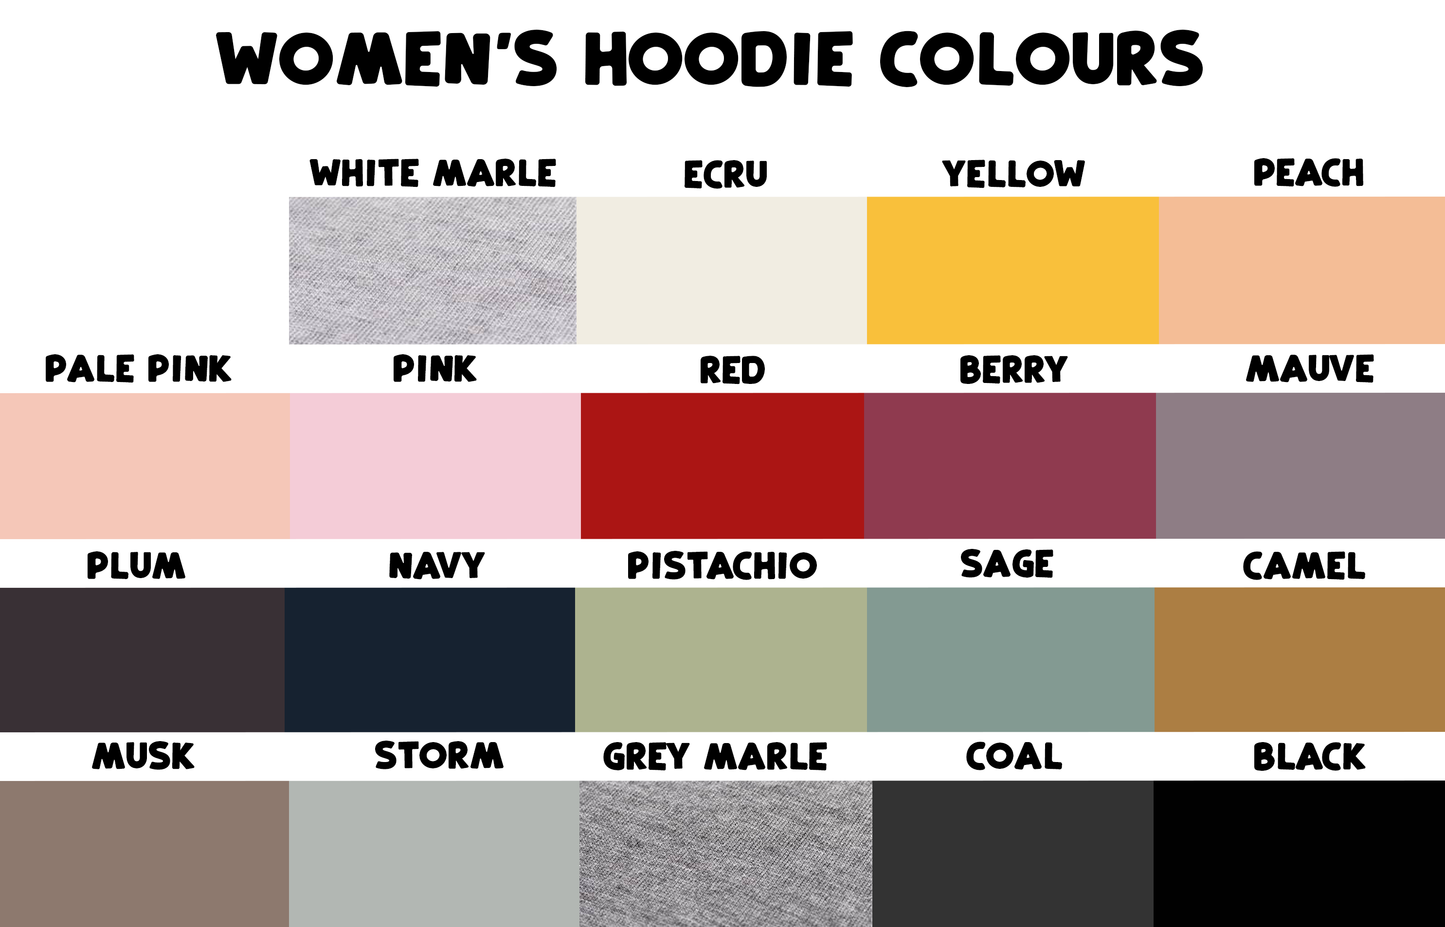 You are hoodie